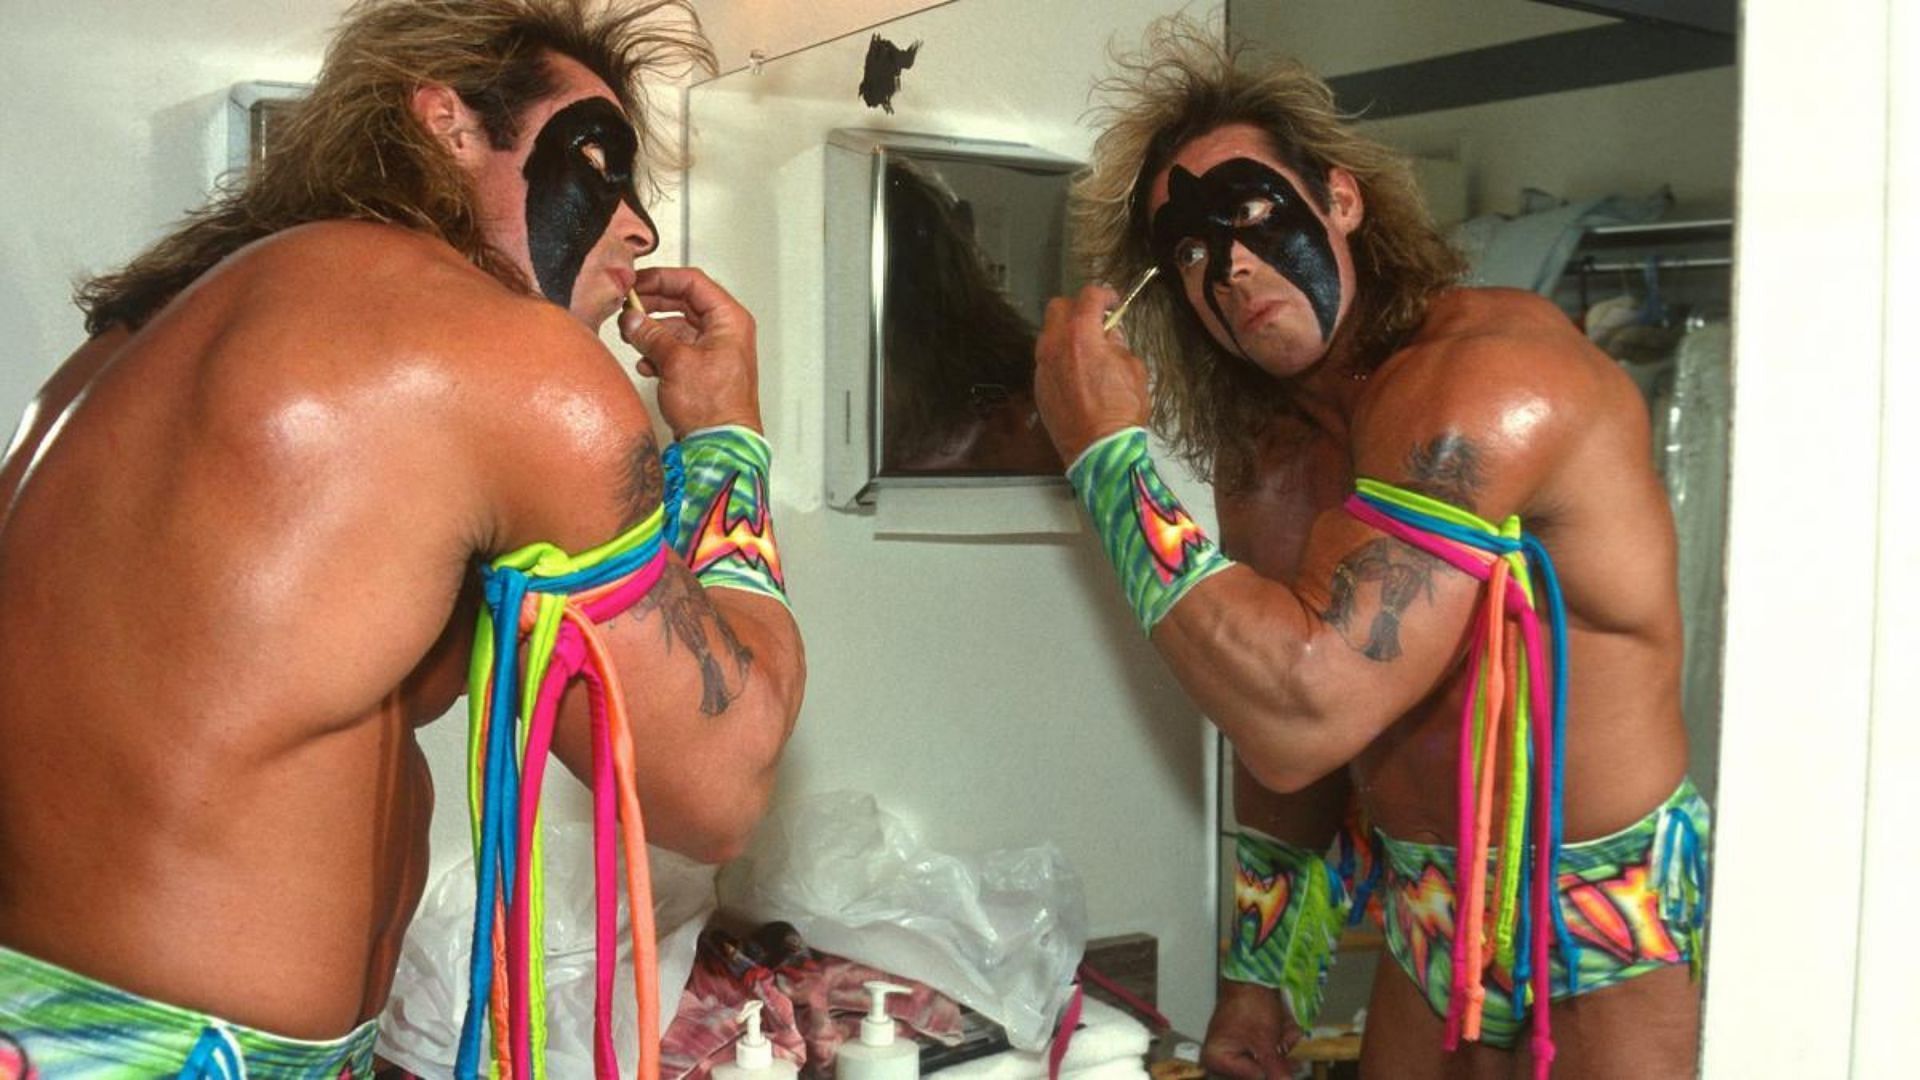 The Ultimate Warrior passed away in 2014 at the age of 54